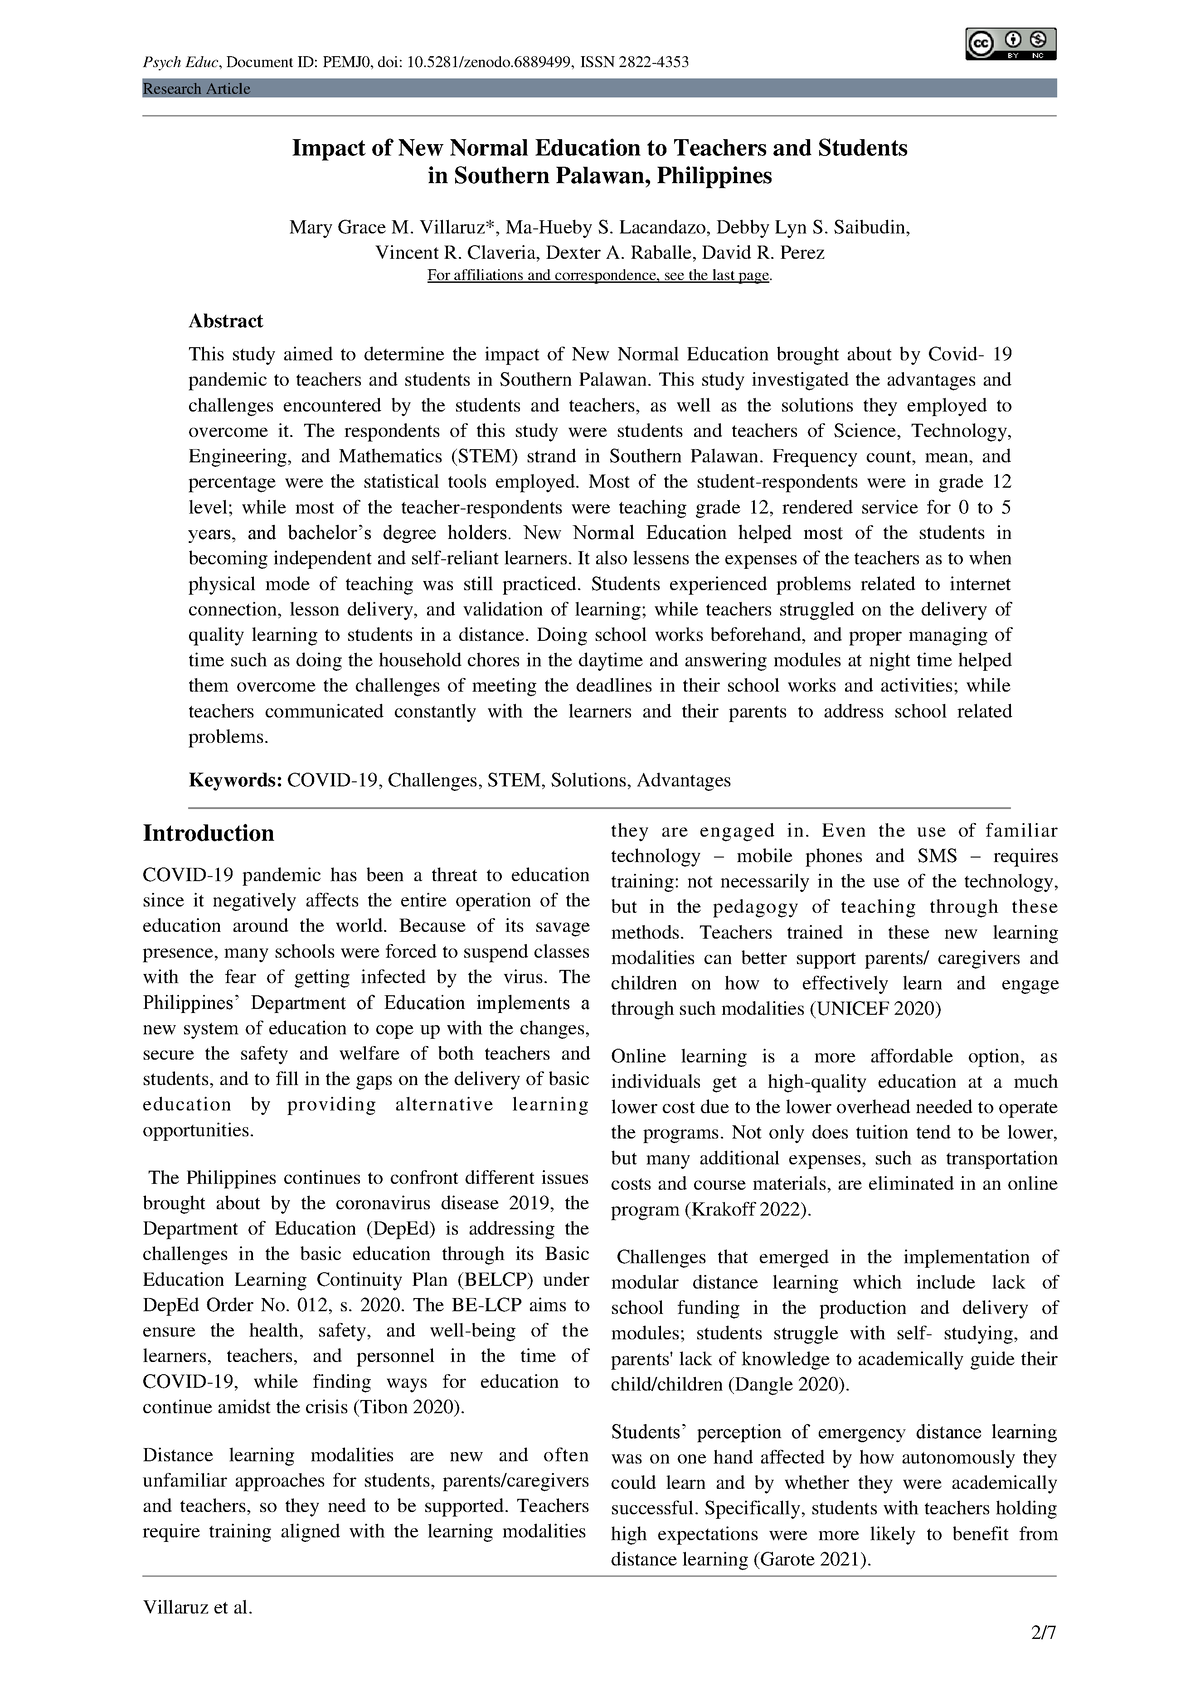 research about new normal education in the philippines pdf